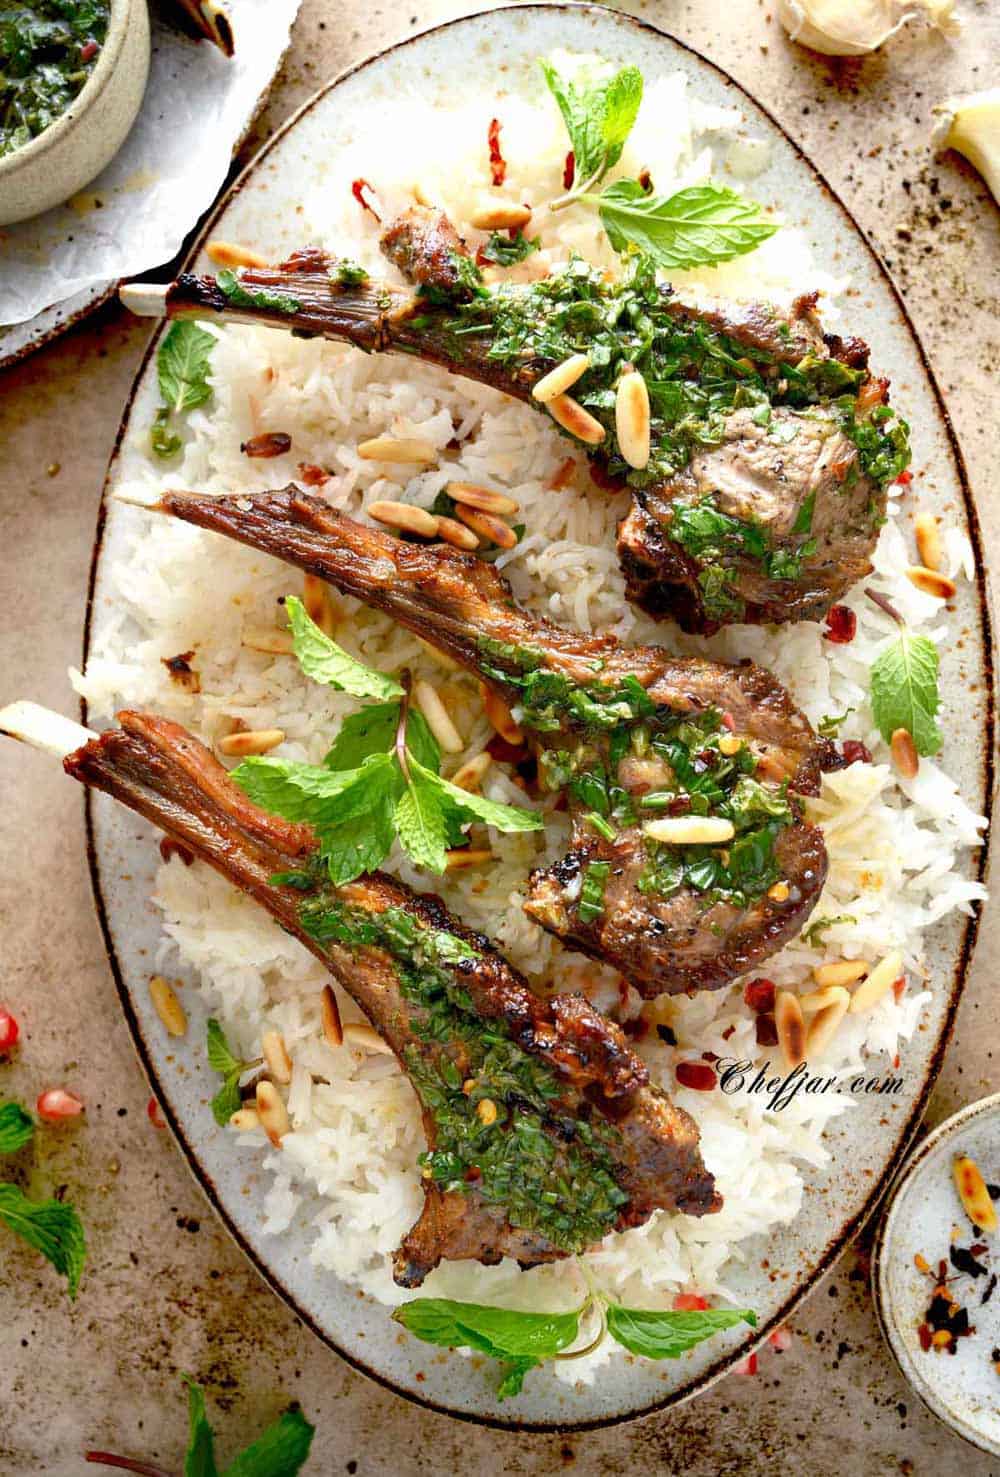 3 lamb chops on an oval platter with basmati rice, mint chimichurri, and toasted pine nuts.